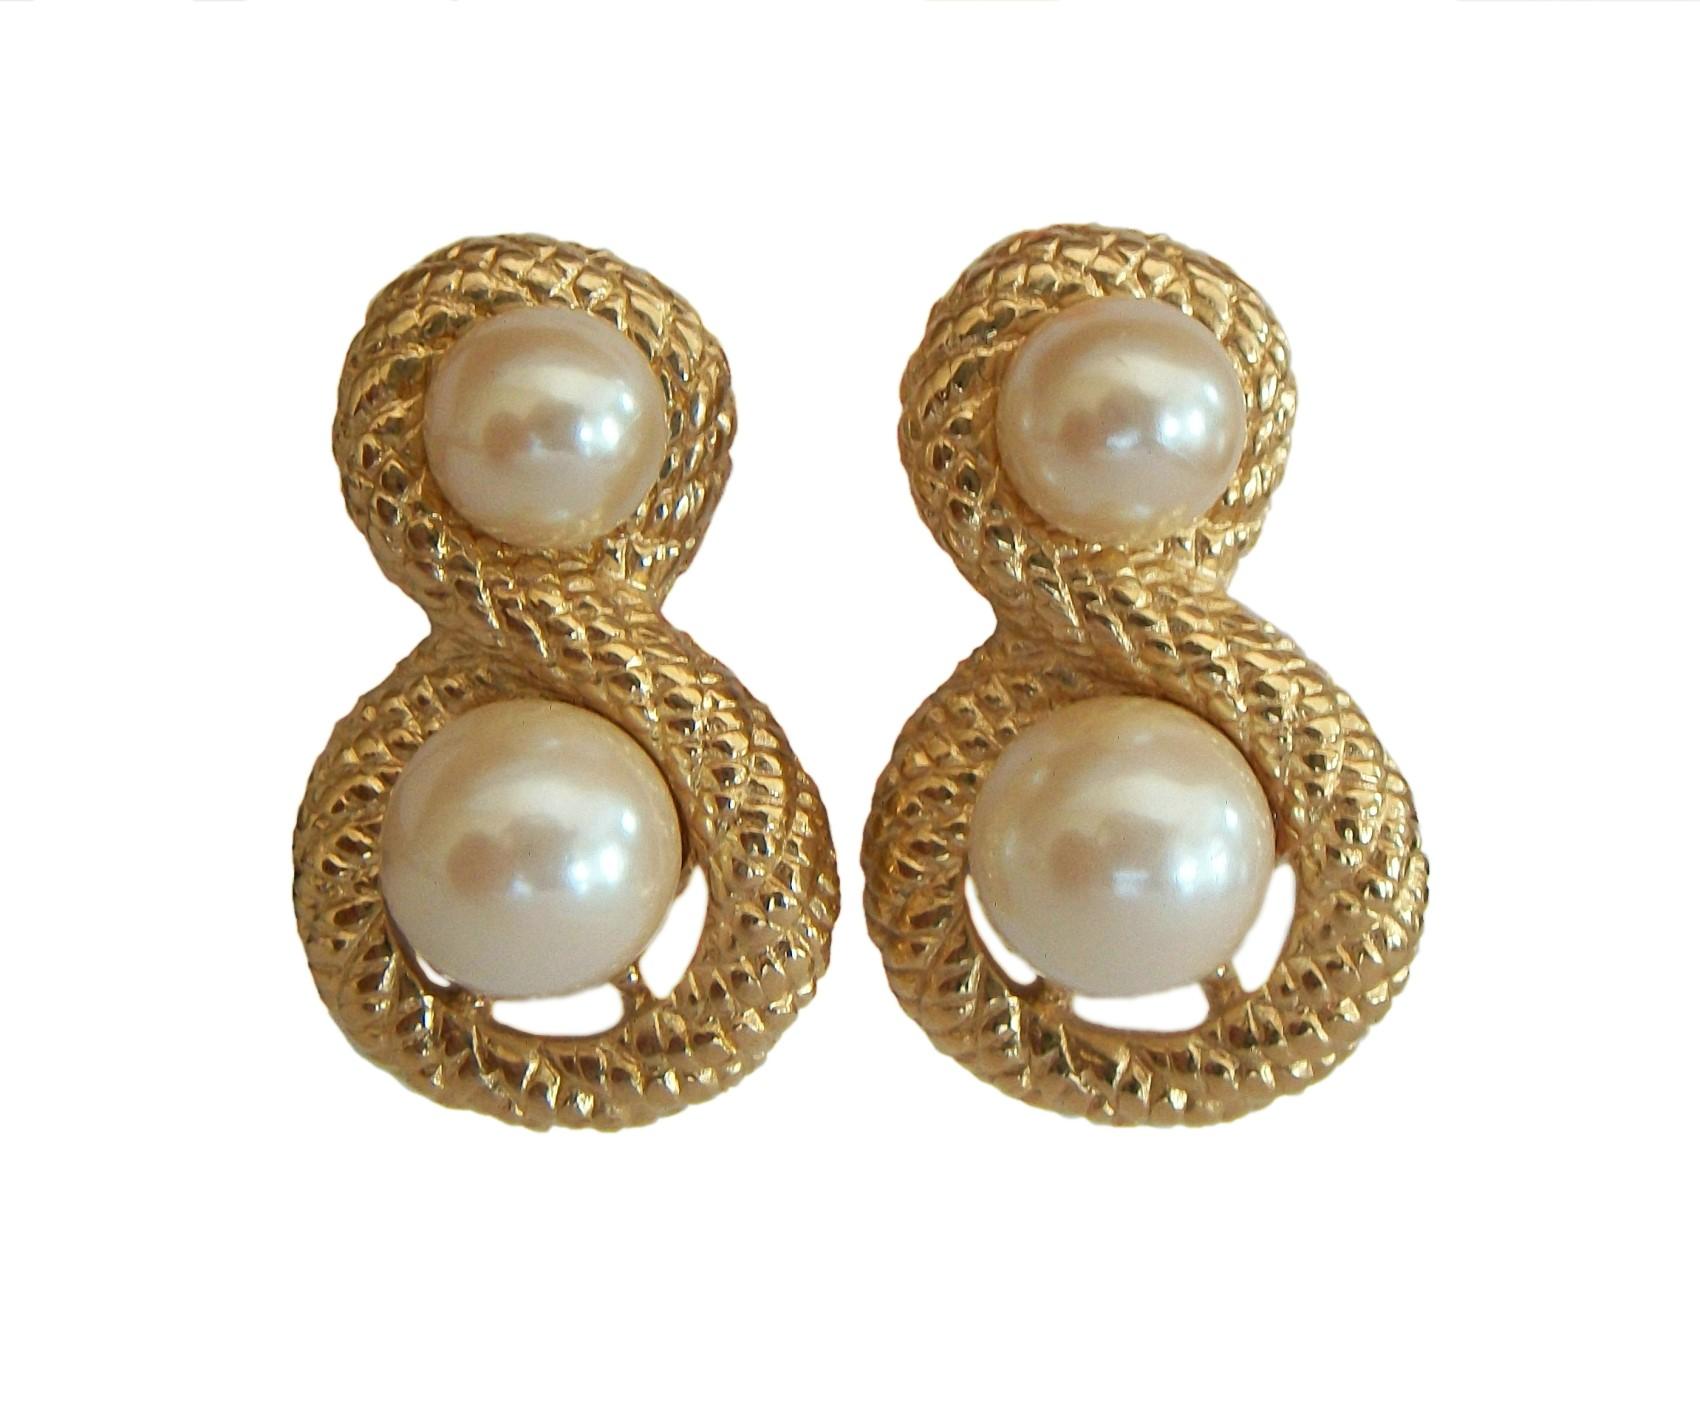 GIVENCHY - Vintage faux pearl and gold tone rope twist statement earrings - for pierced ears - signed - circa 1980's.

Excellent vintage condition - no loss - no damage - no repairs - replaced butterfly backs - minimal signs of age and use - ready